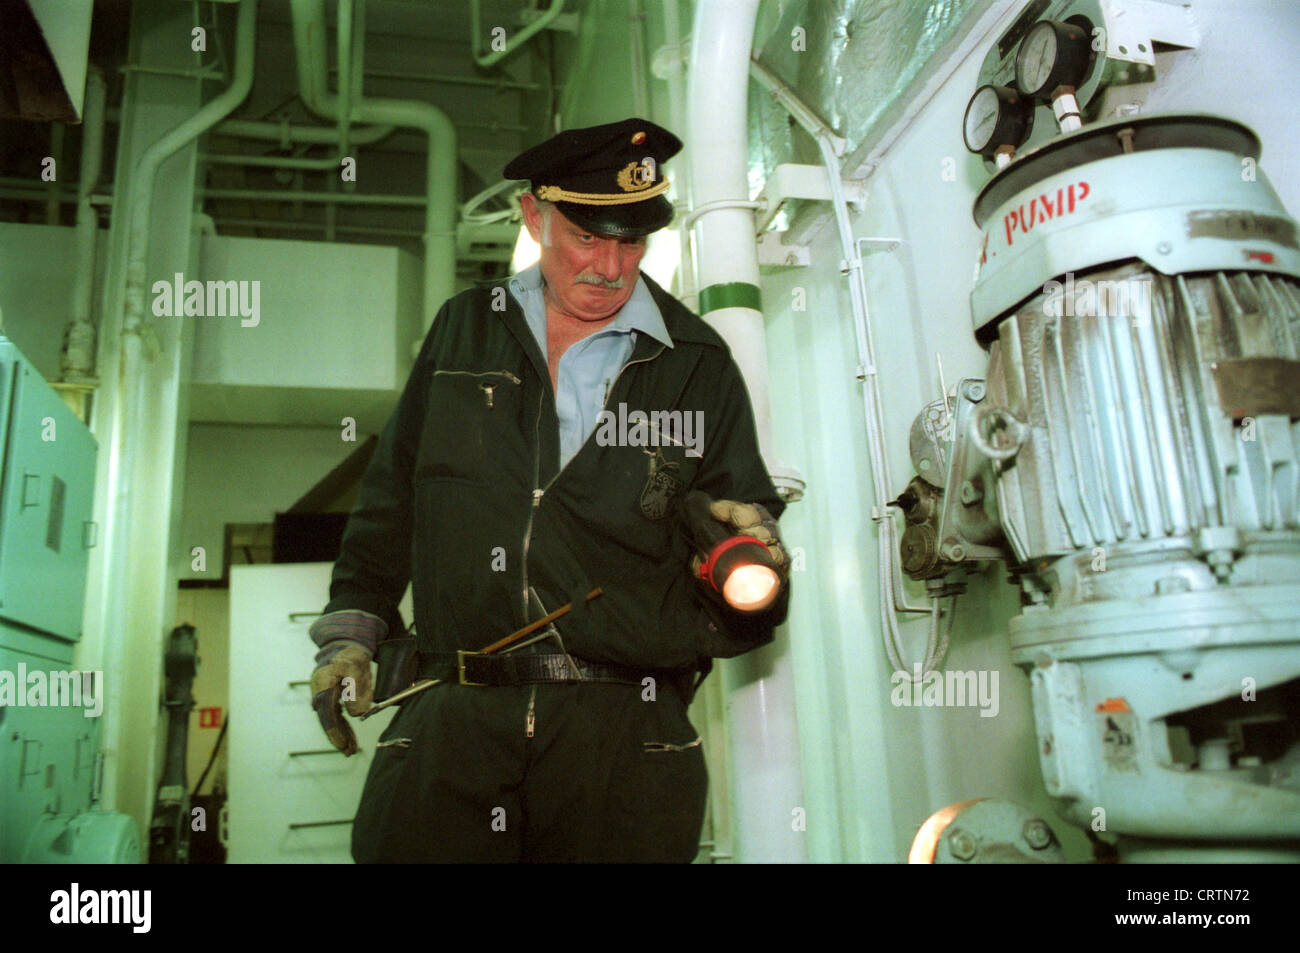 A customs officer of the Black-speed at work, Hamburg Stock Photo